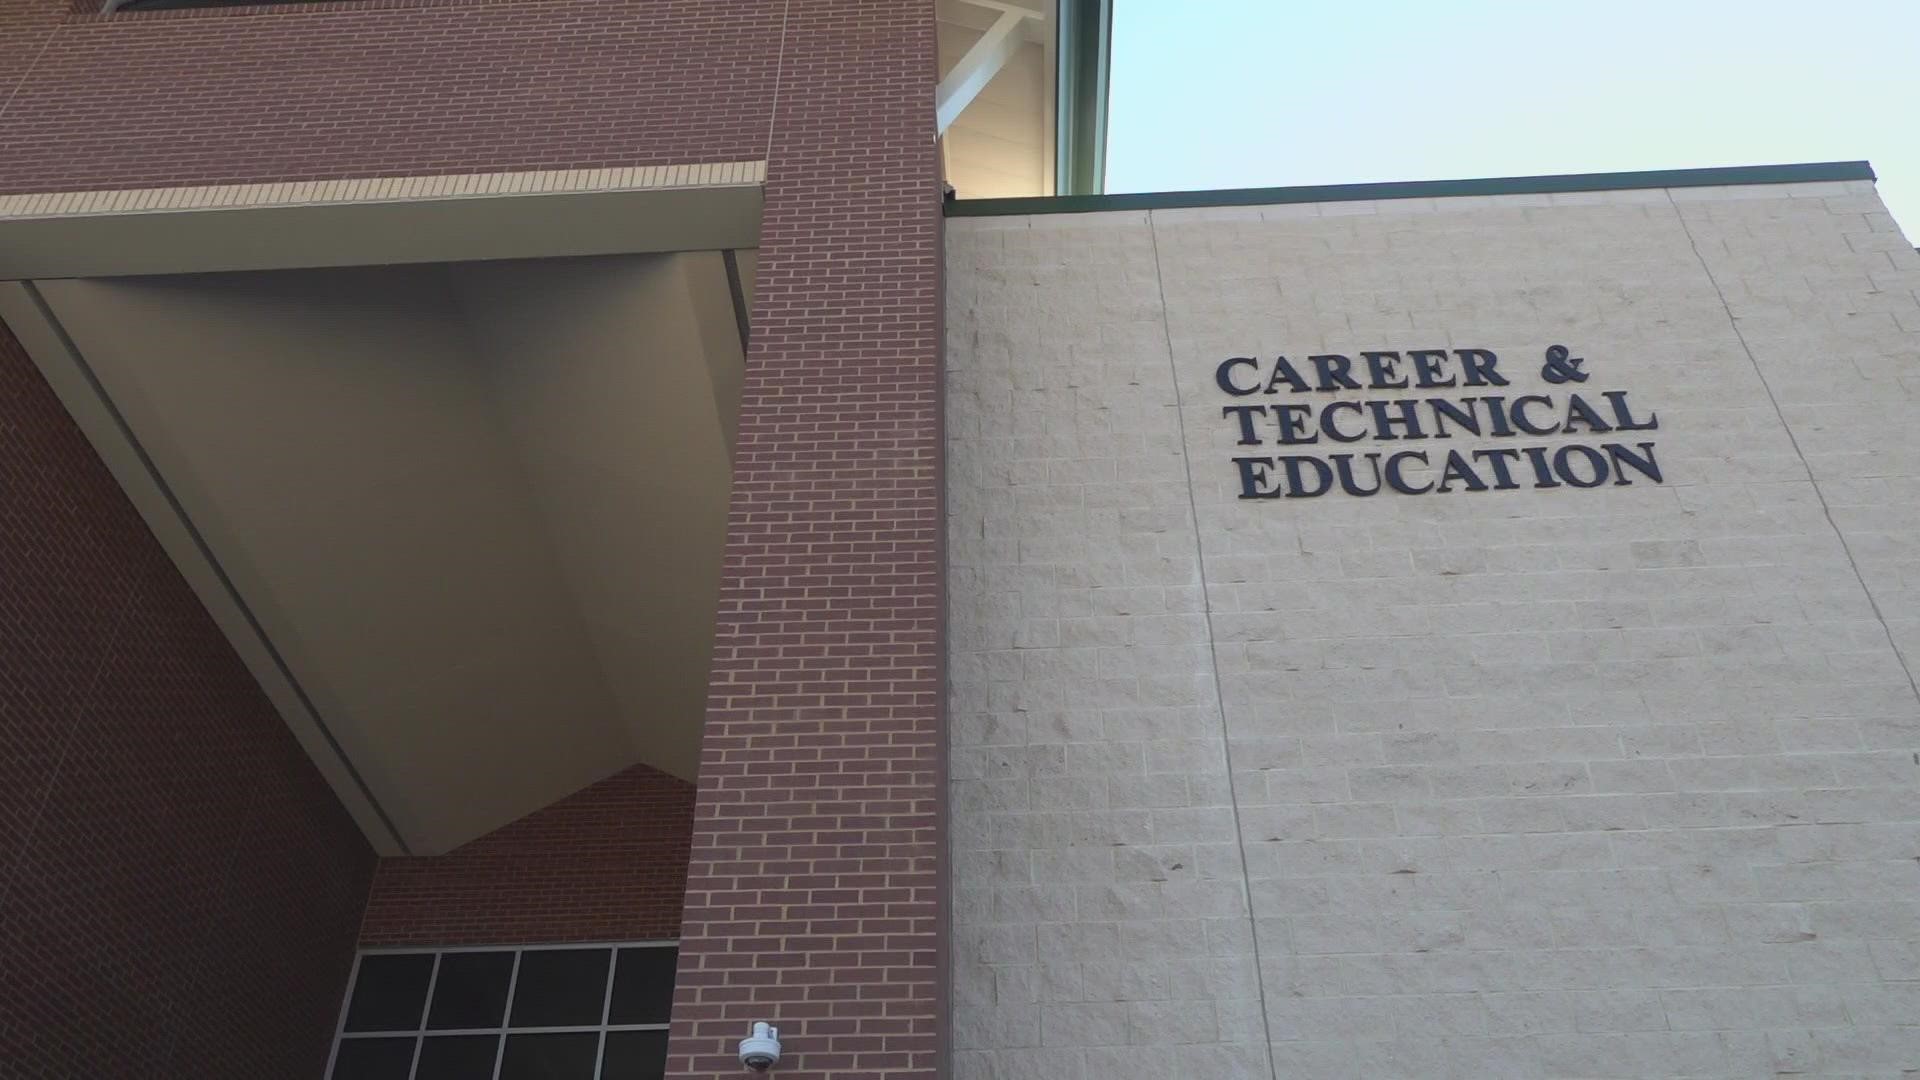 The million-dollar project for a new wing began in 2018 and 6 News reporter Meredith Haas gives a look at what the facility offers incoming students.